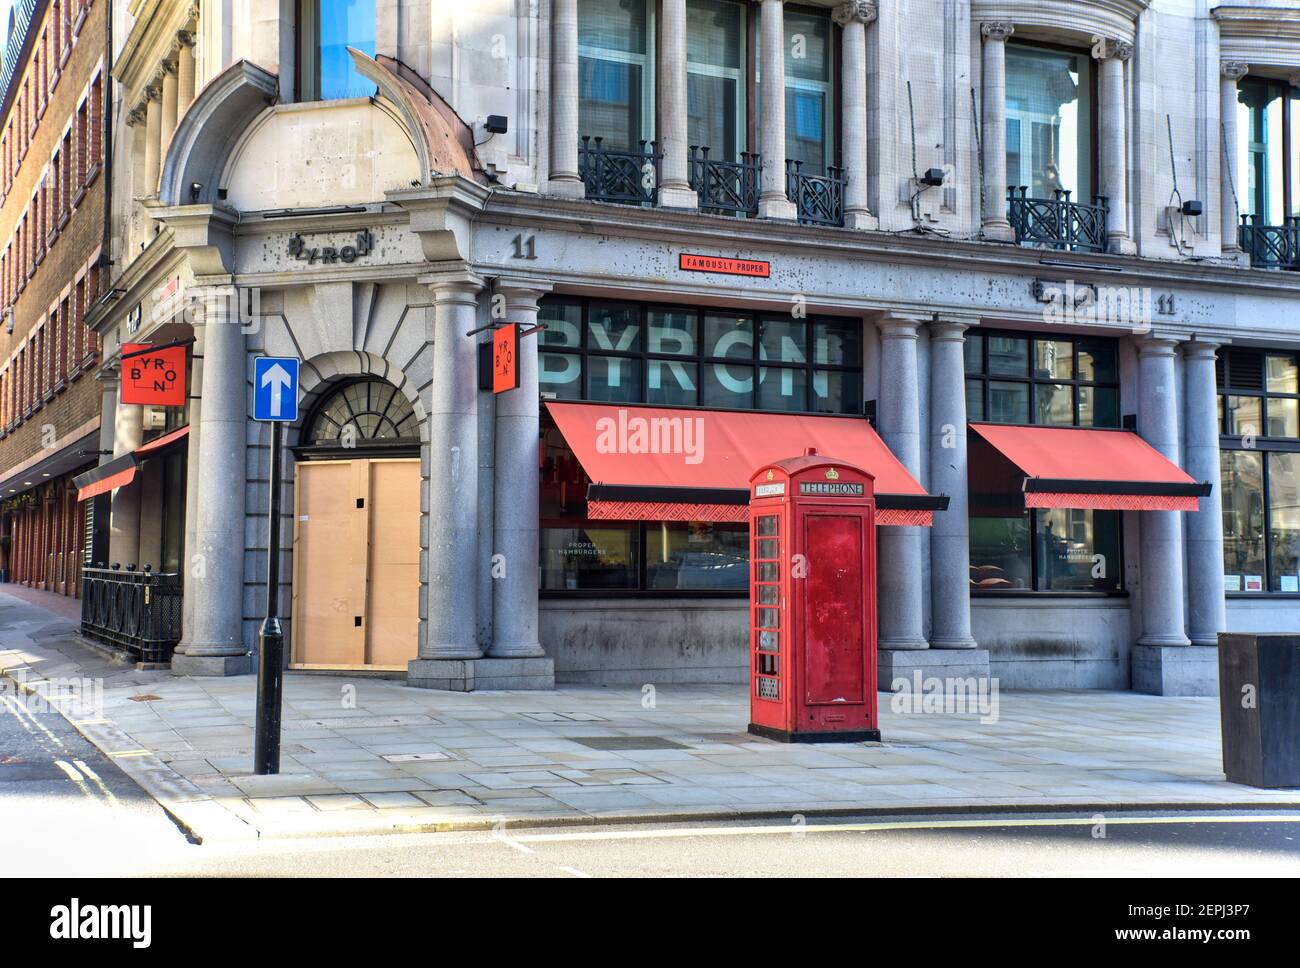 A Byron burger restaurant with its door boarded up in London remains closed during the third national lockdown due to the Coronavirus pandemic. Stock Photo